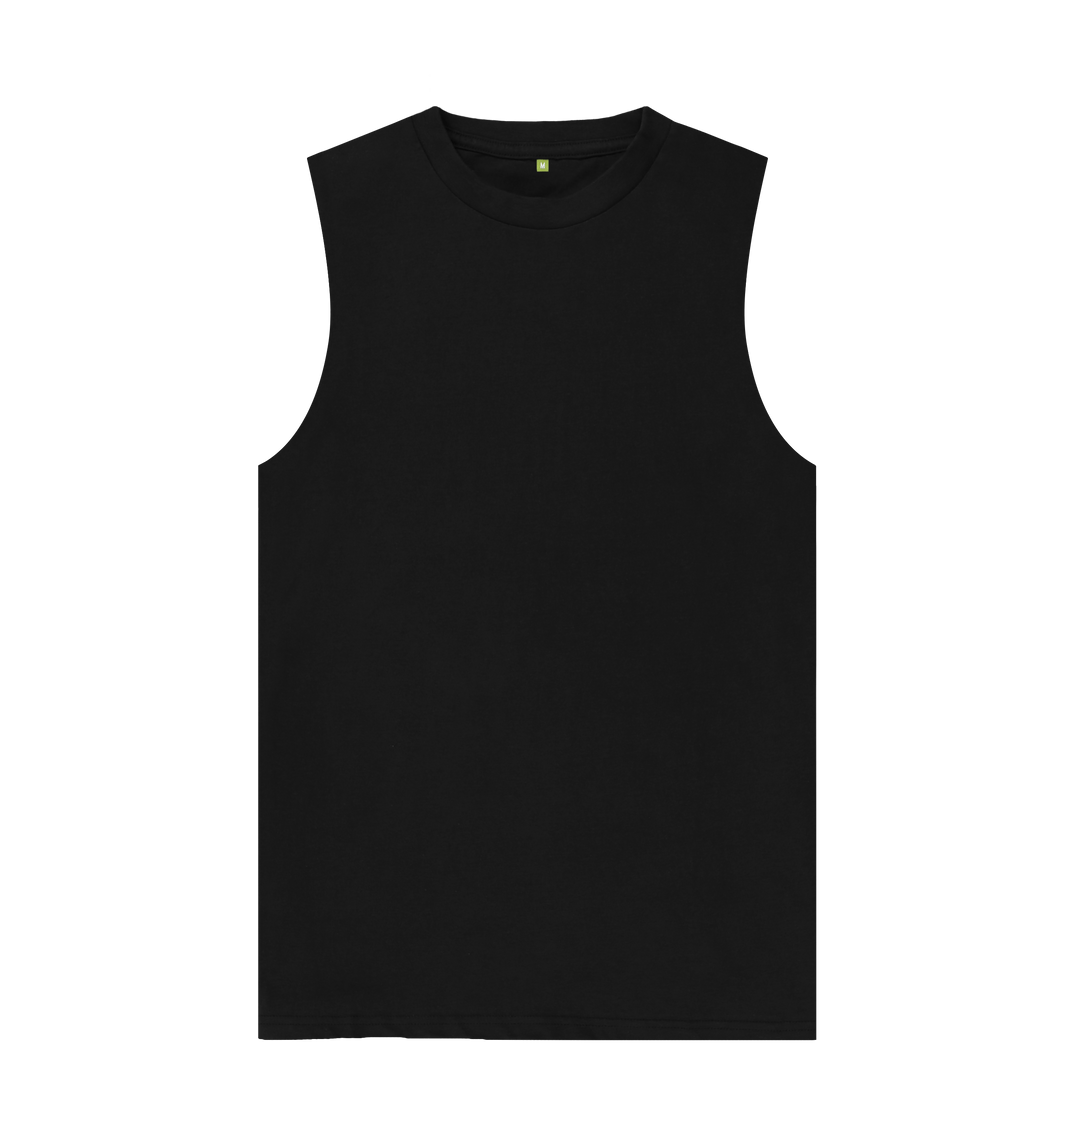 Aryan Hosiery Men's Banyan Vest: Classic and Comfortable Sleeveless Shirt  for Casual Wear